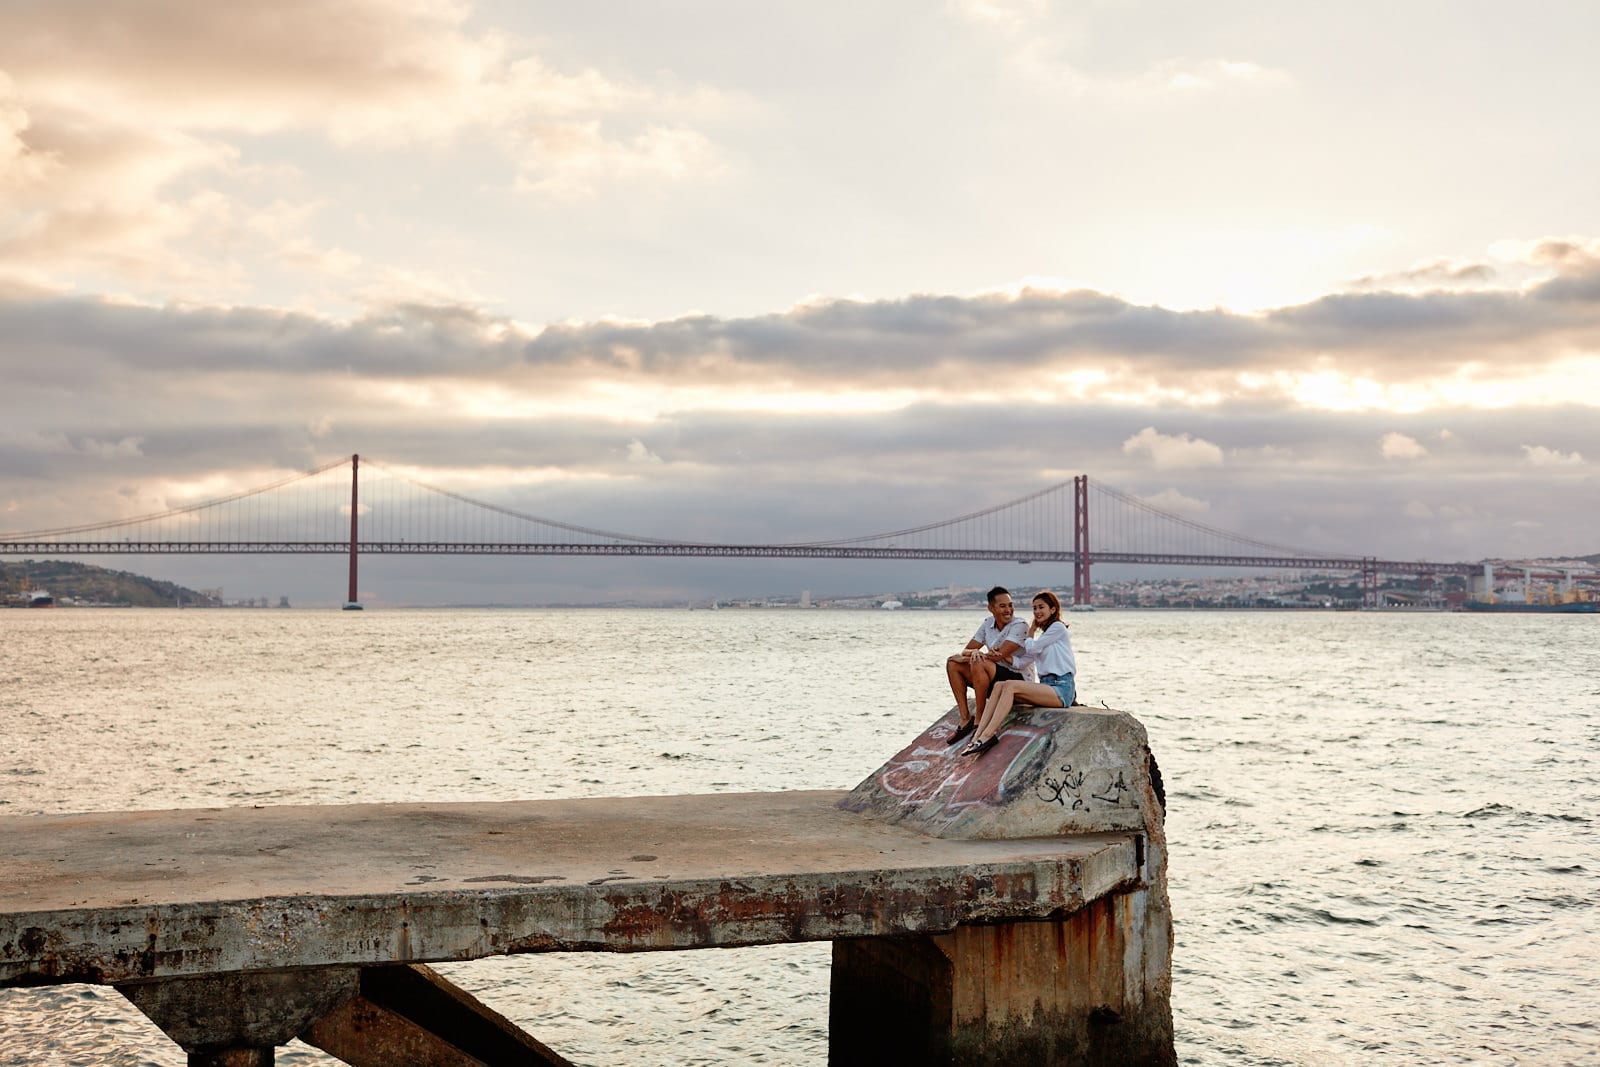 Eliza Sam and Joshua Ngo sit at the old docks on the southern bank of the Tagus river in Lisbon at sunset